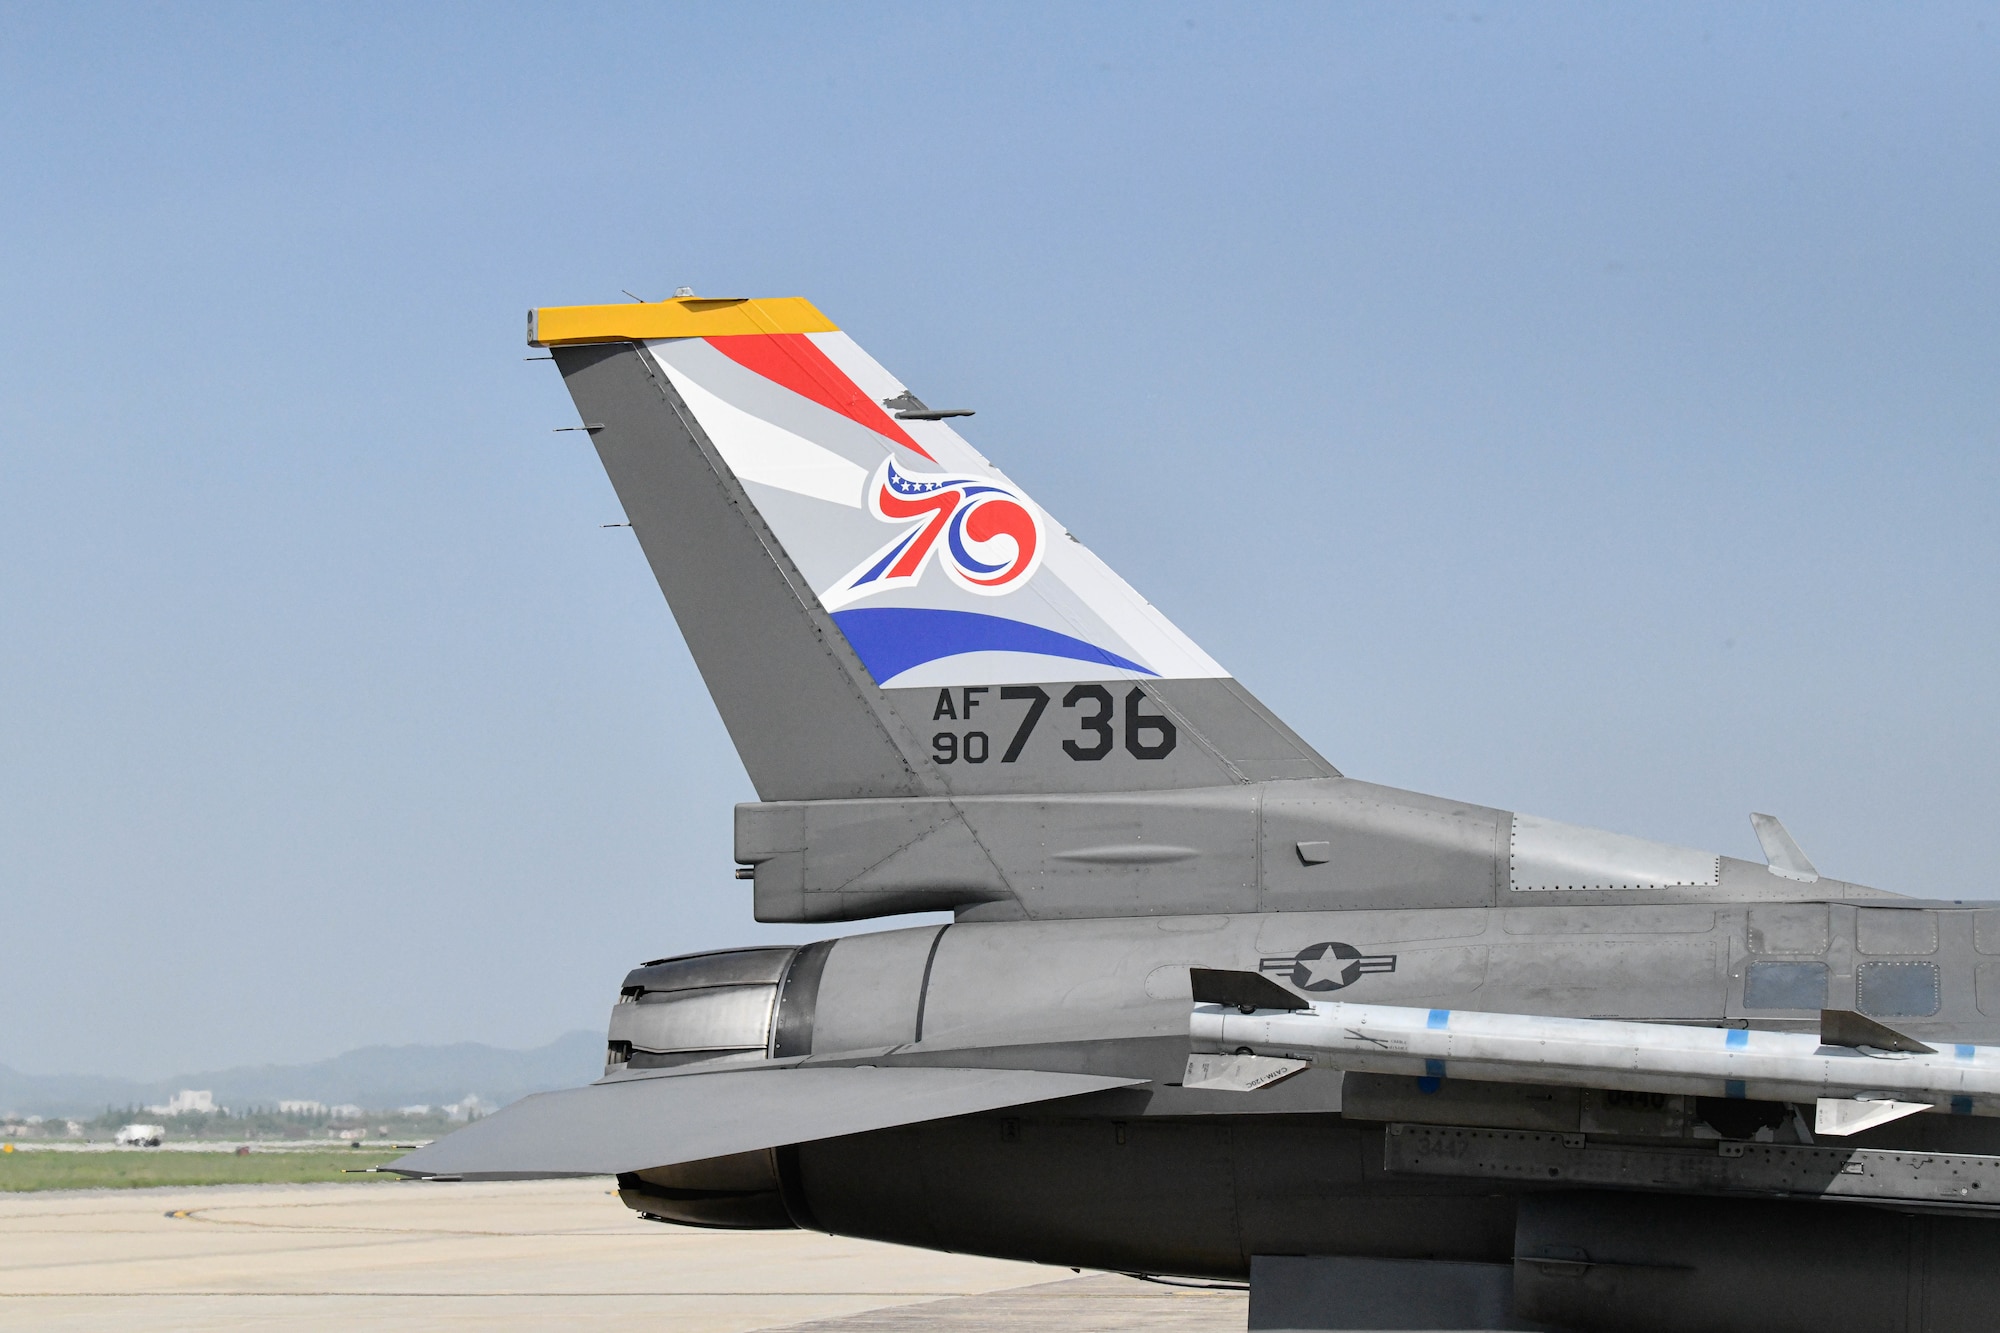 An F-16 Fighting Falcon assigned to the 8th Fighter Wing, Kunsan Air Base, Republic of Korea, taxis to the runway with a U.S.-ROK Alliance 70th Anniversary tail flash at Osan AB, ROK, May 7, 2023. The signing of the U.S.-ROK Mutual Defense Treaty in 1953 marked the beginning of the U.S.-ROK Alliance. (U.S. Air Force photo by 1st Lt. Cameron Silver)